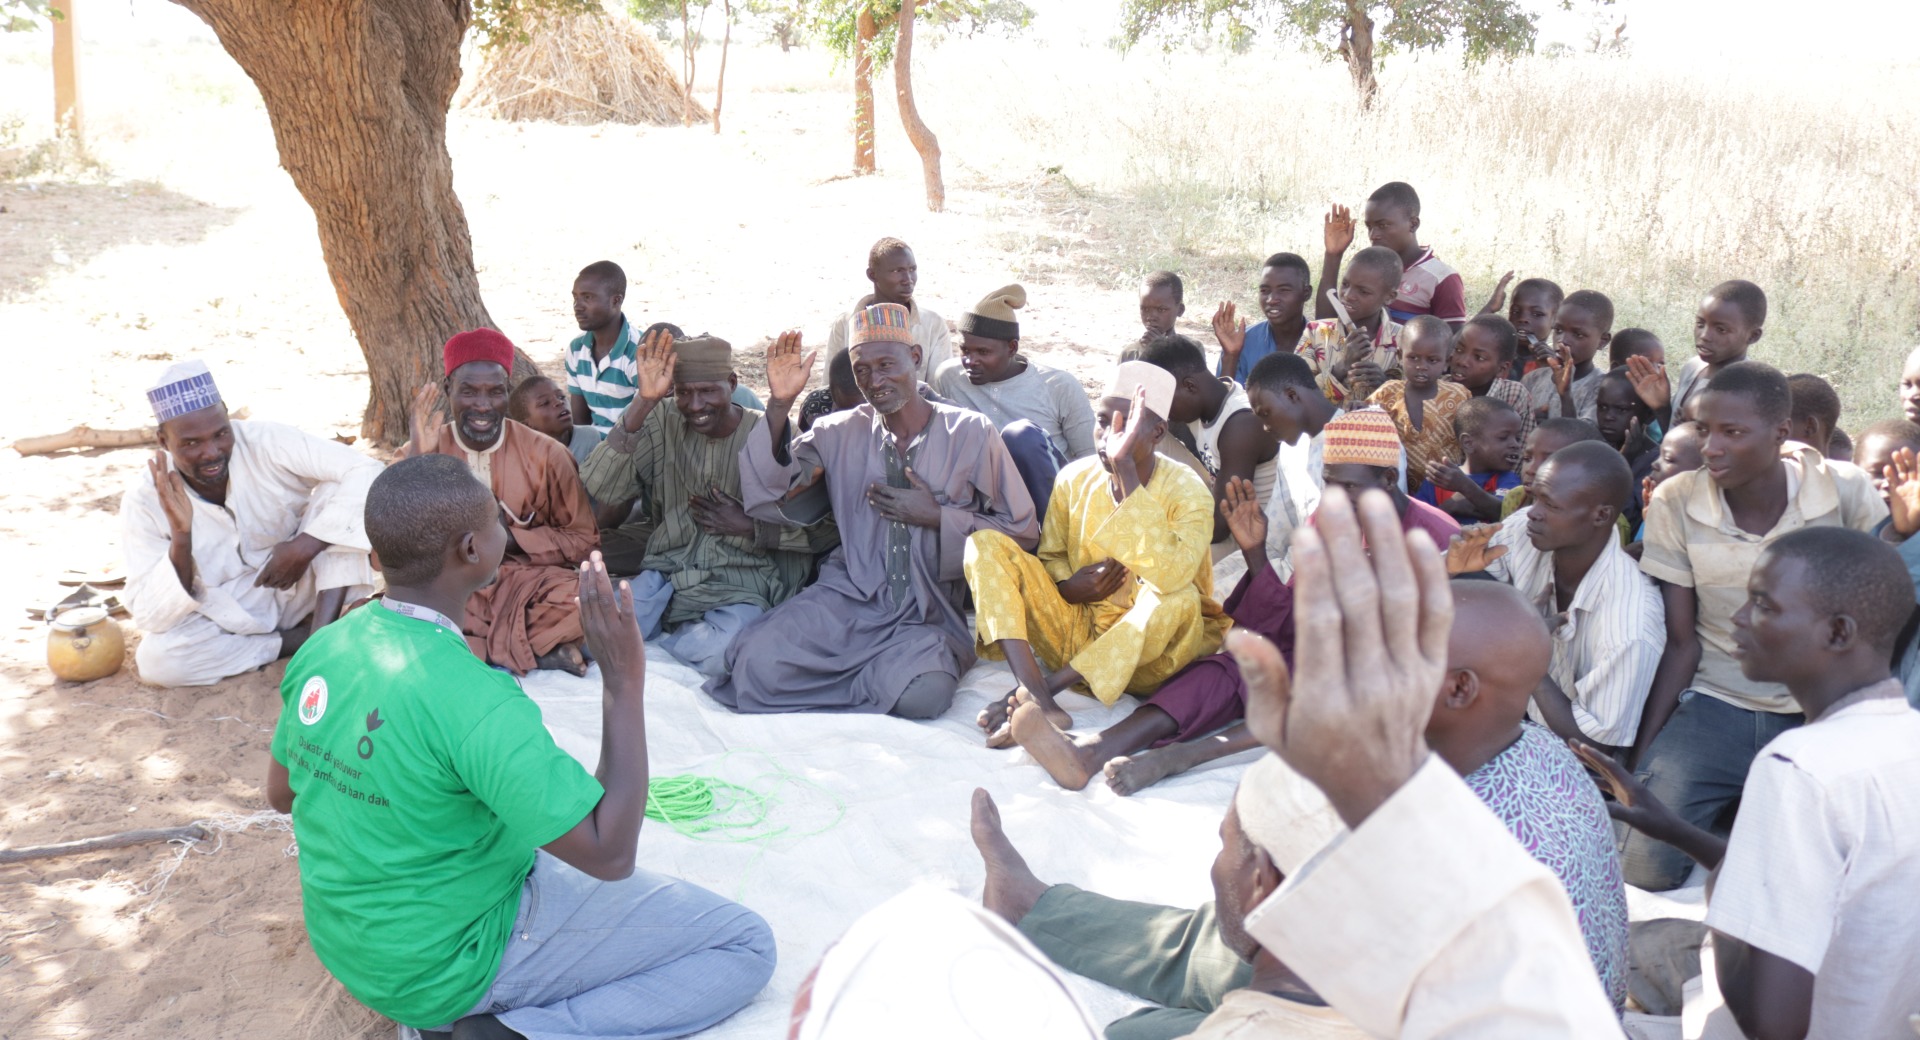 Hassan Mamman and the other men in his fathers’ group raise their hands and recite a pledge, committing to healthy hygiene, safe sanitation, and good nutrition in their community.